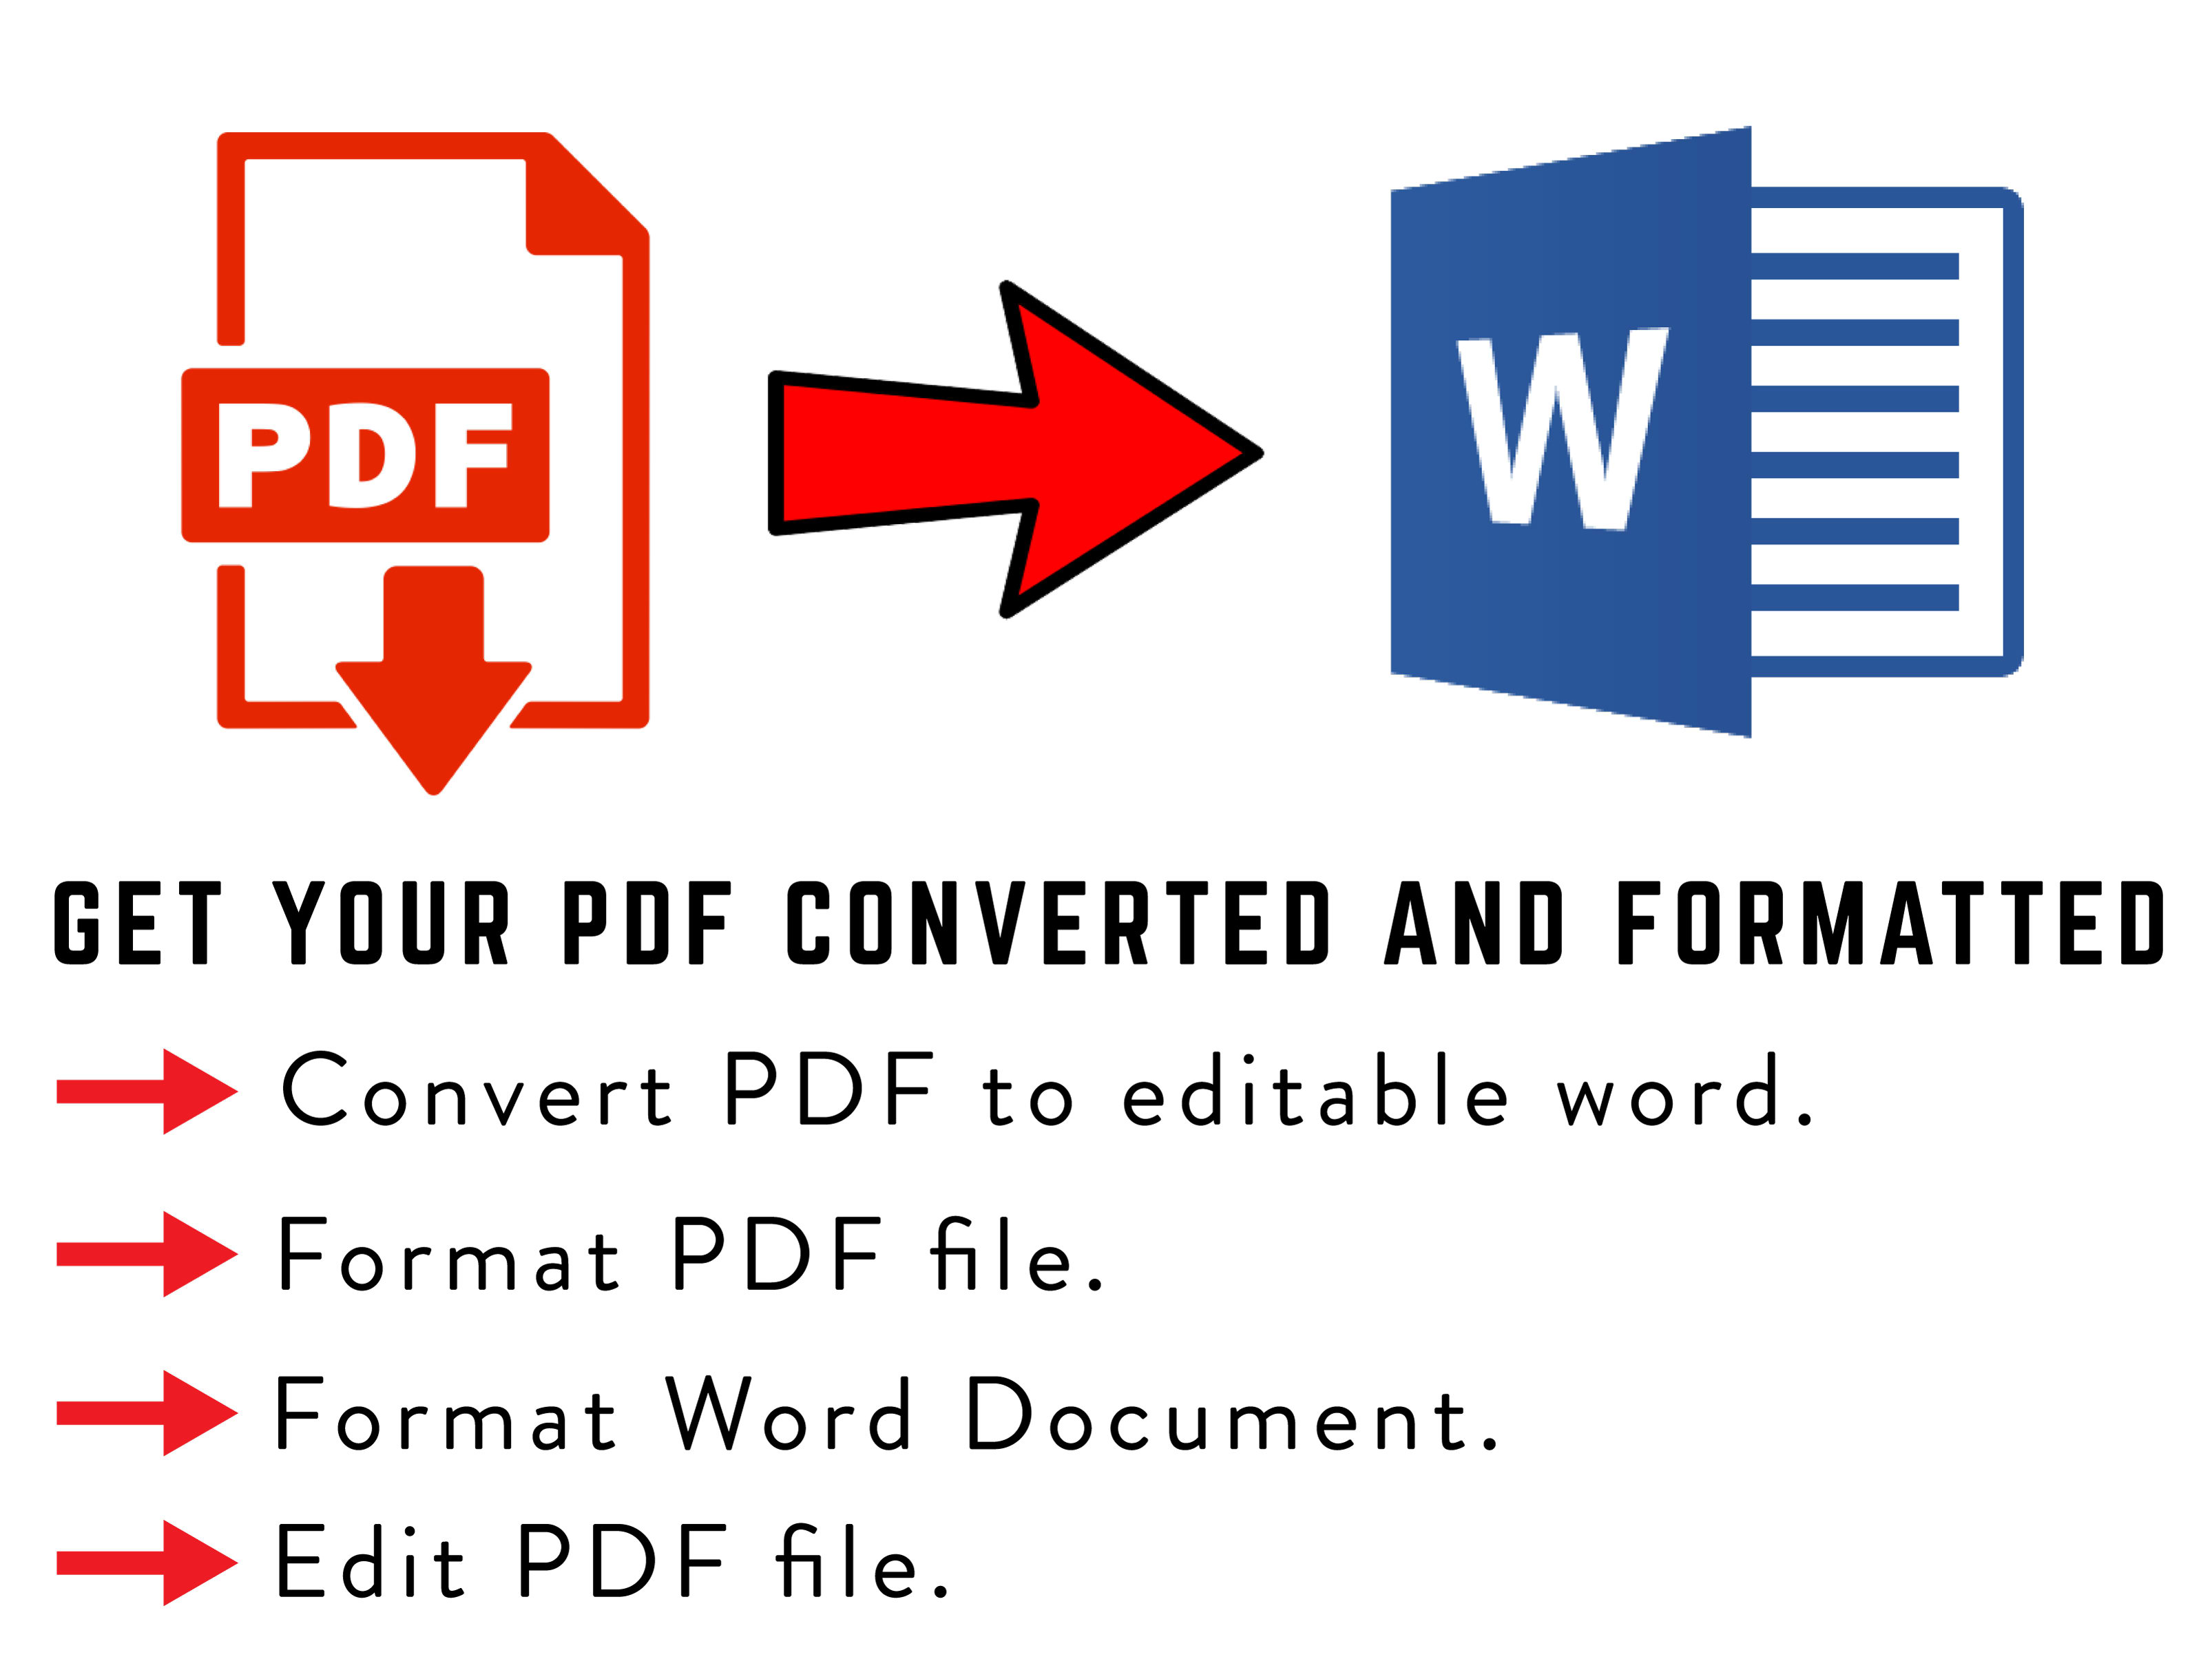 Rev up Your Document Game: Sexy PDF to Word Conversions Take Center Stage